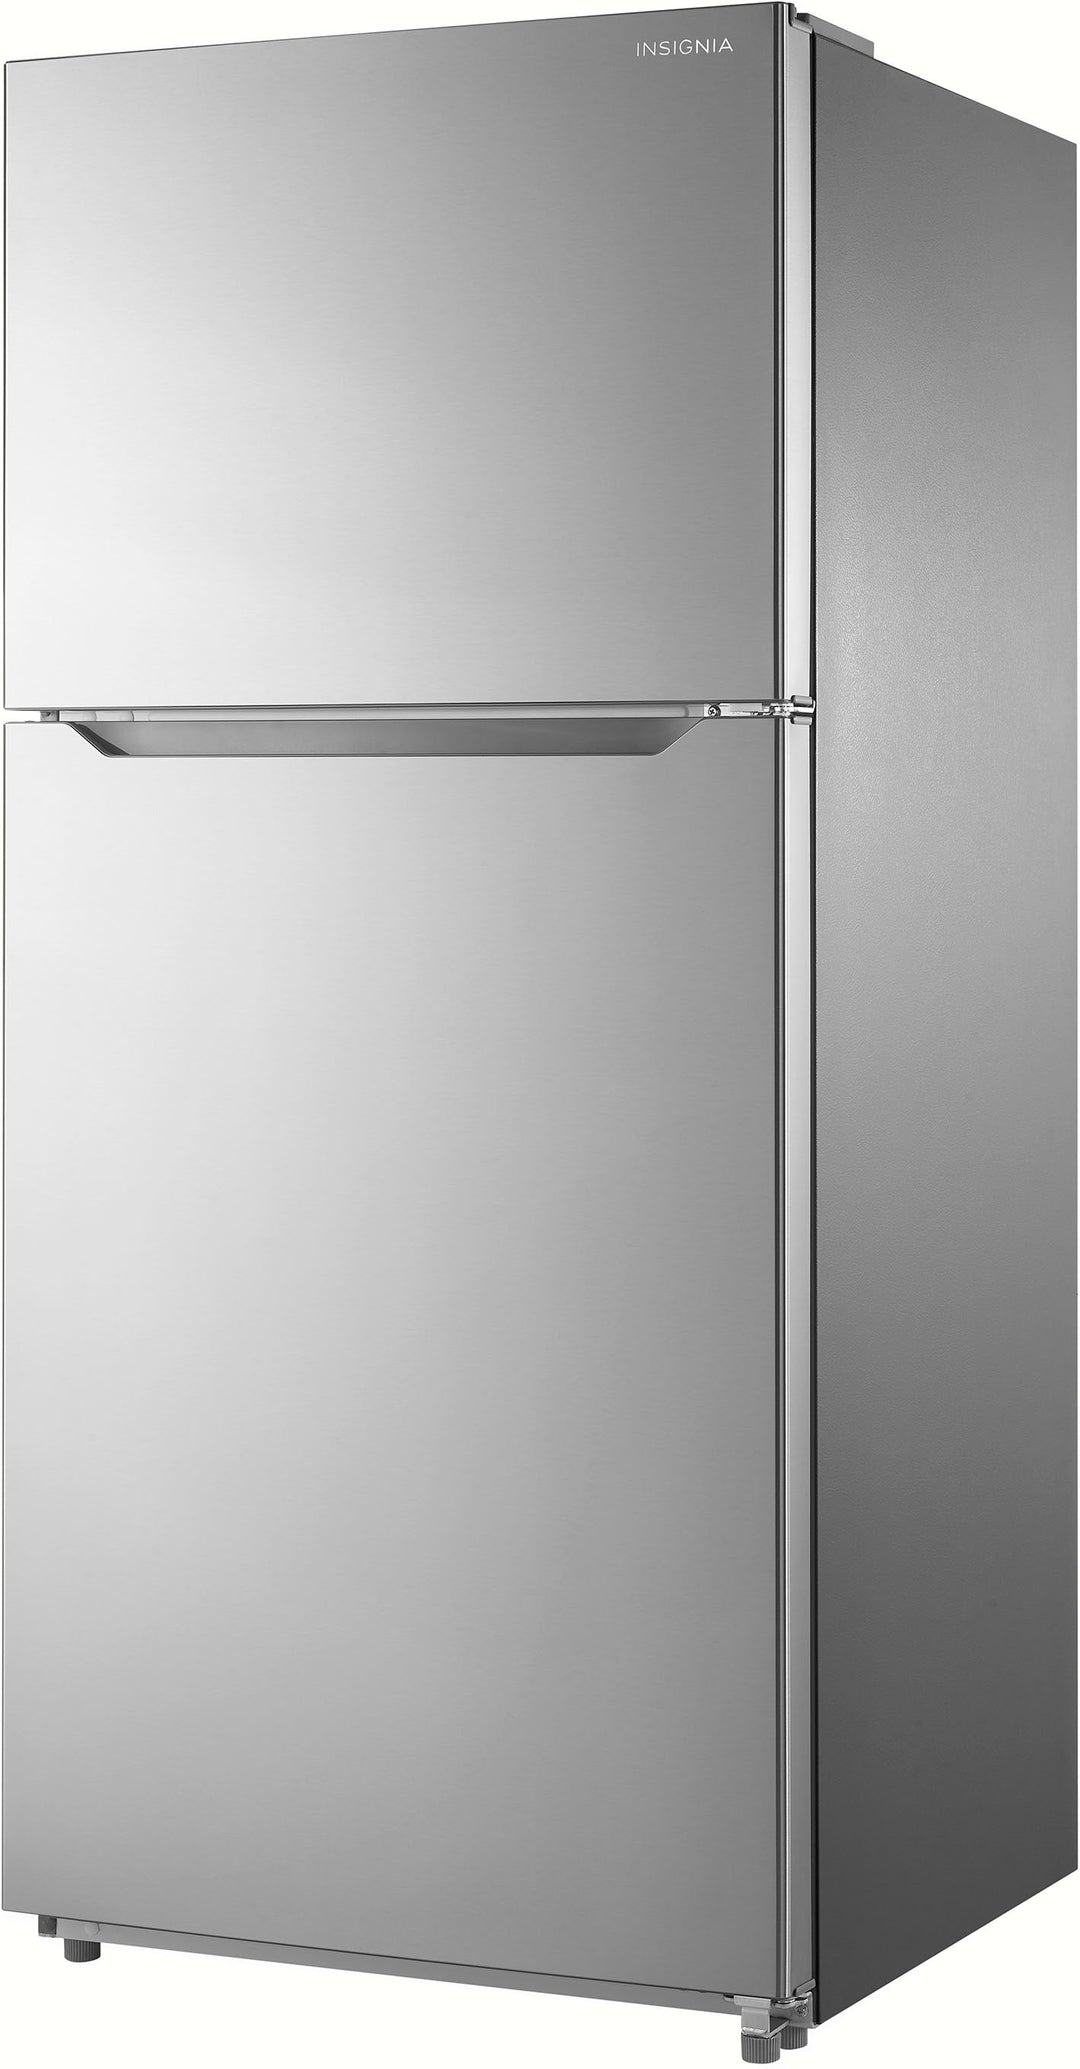 Insignia™ - 18 Cu. Ft. Top-Freezer Refrigerator - Stainless steel_2